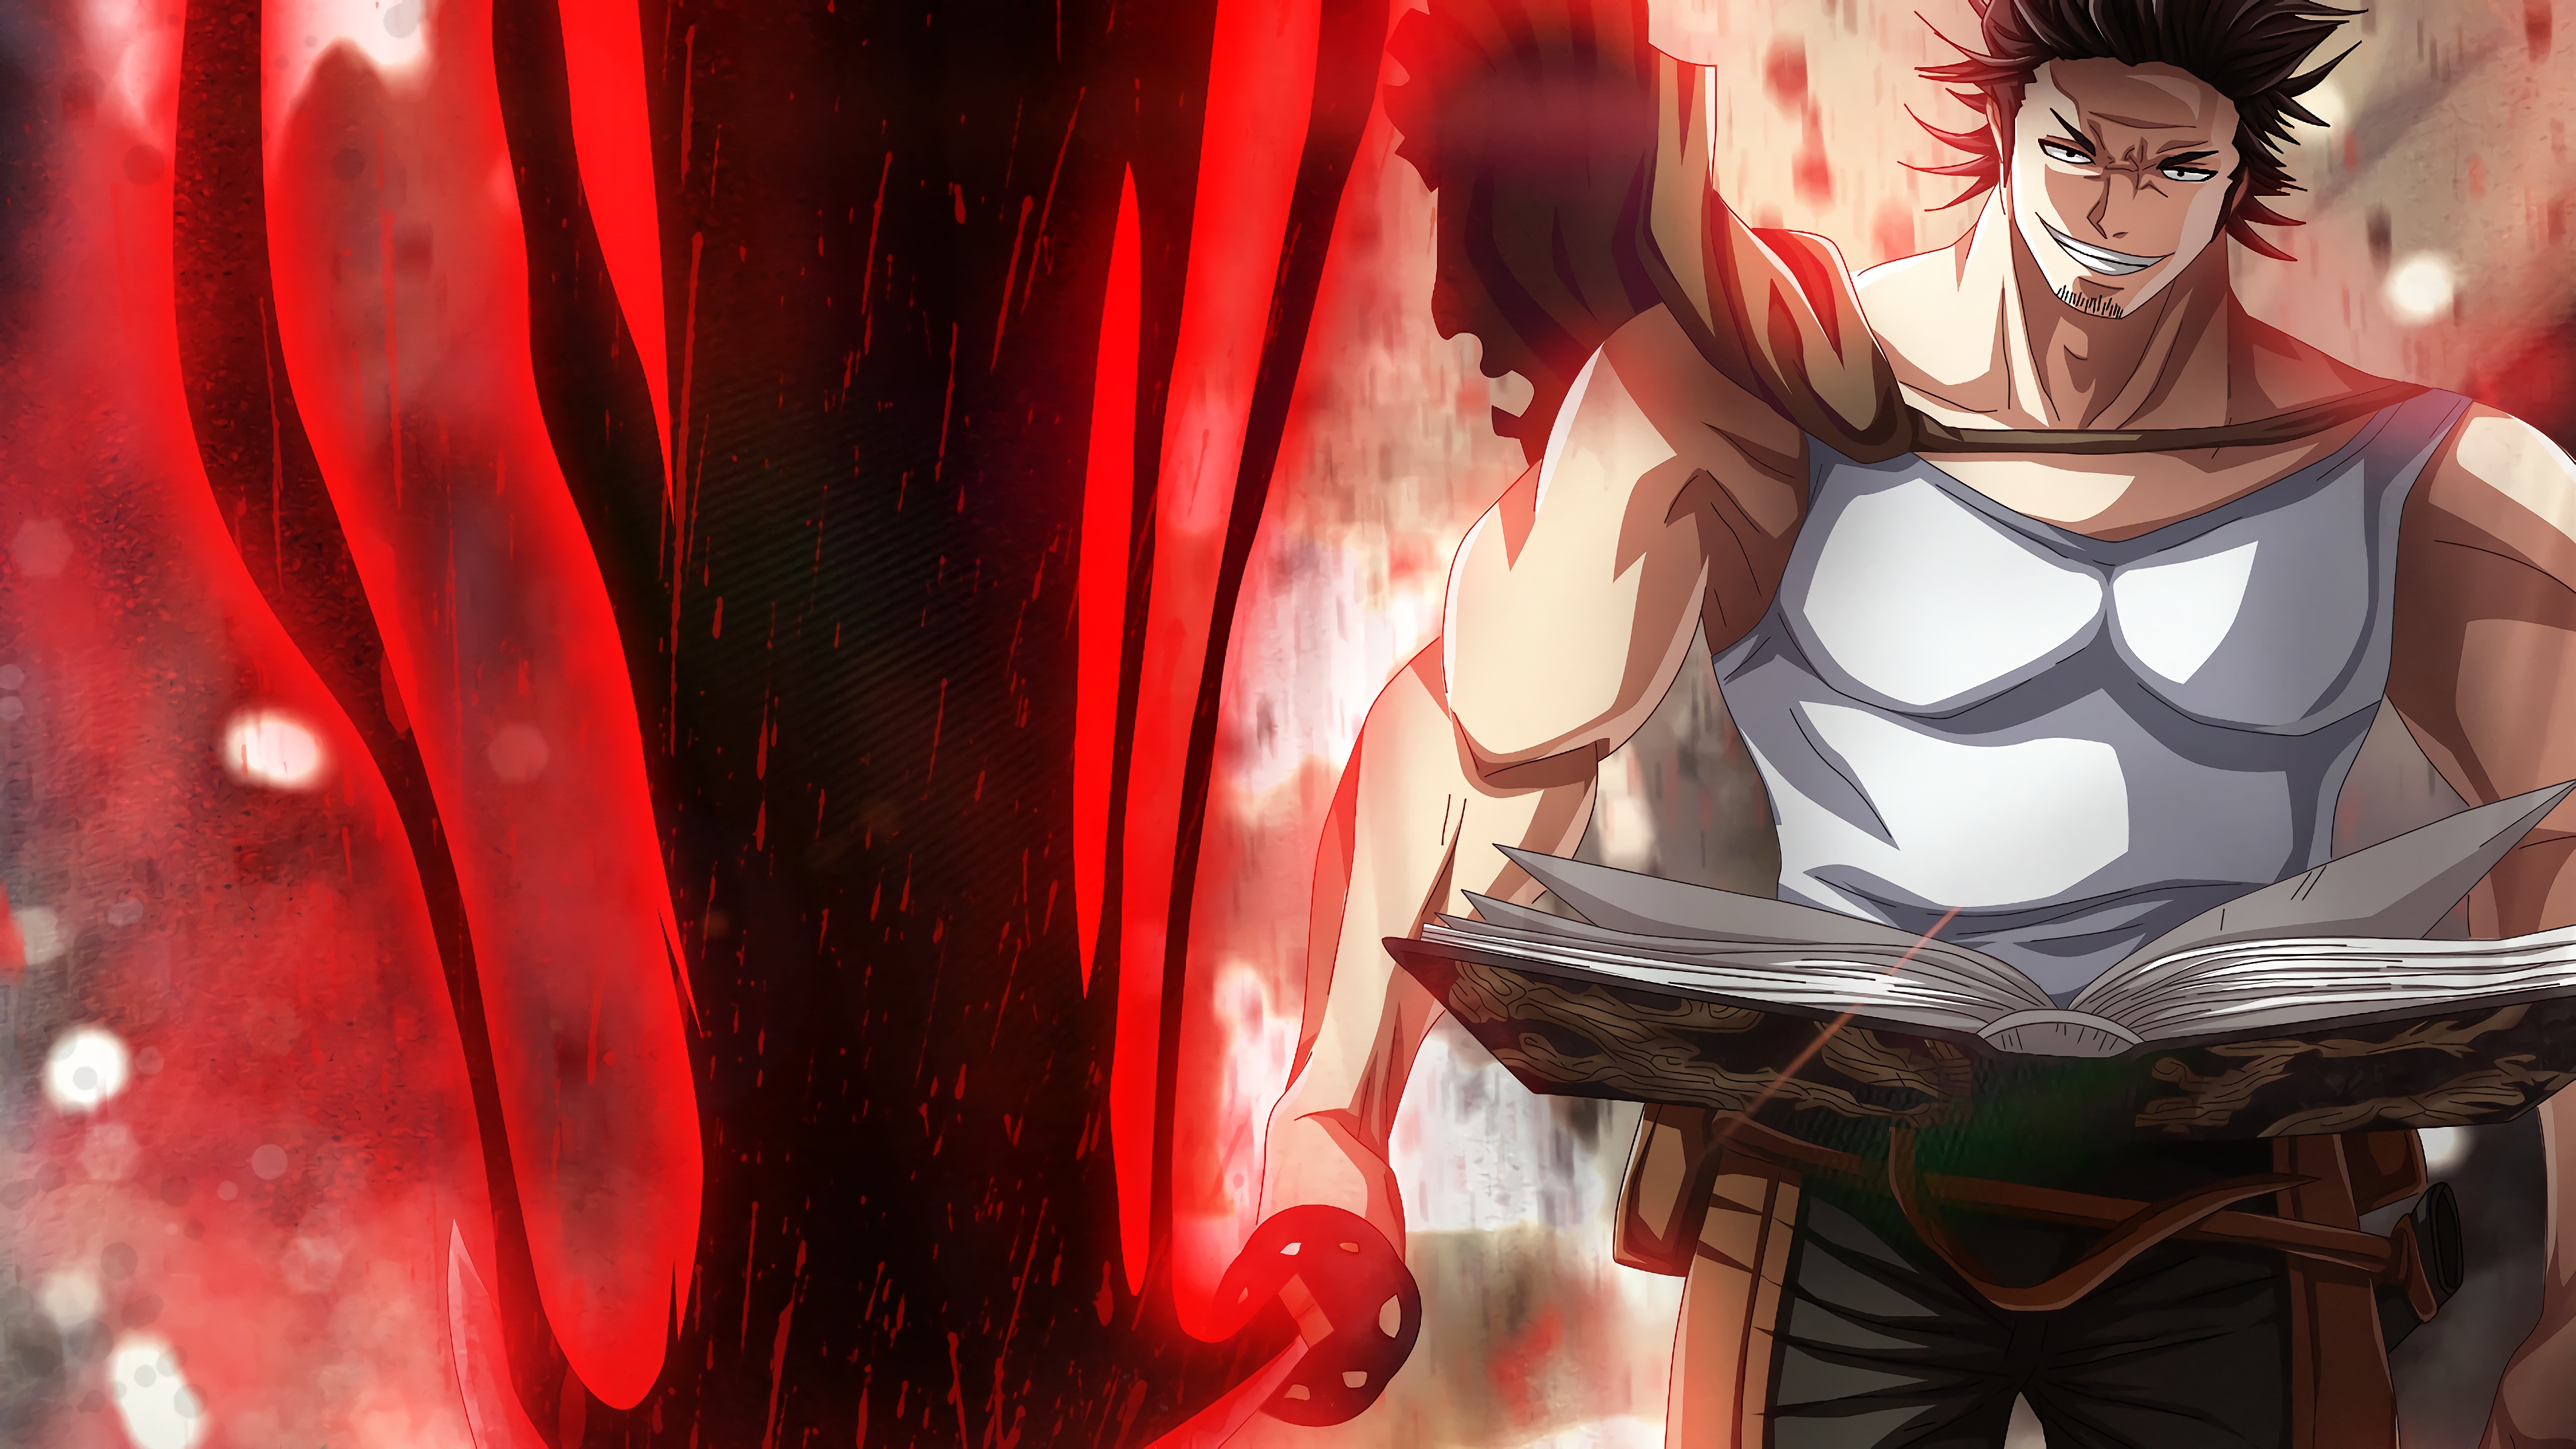 350+ Anime Black Clover HD Wallpapers and Backgrounds